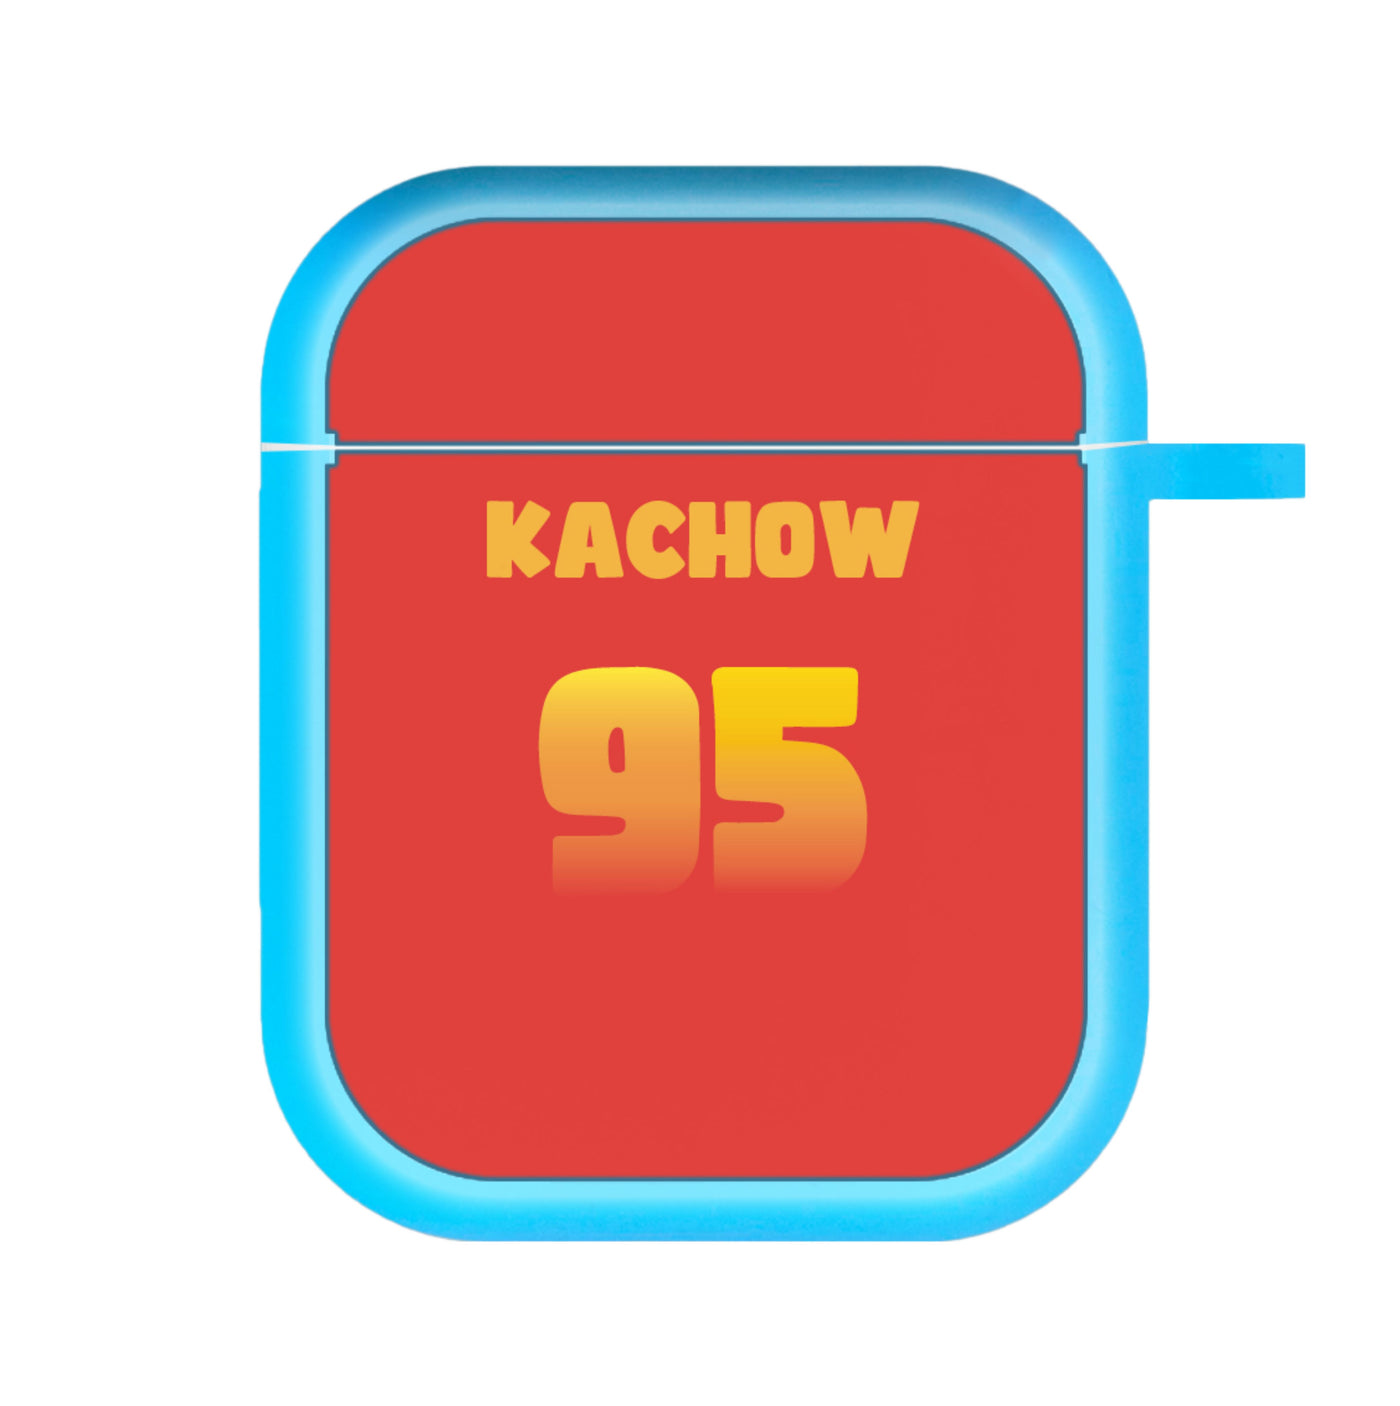 Kachow 95 - Cars AirPods Case